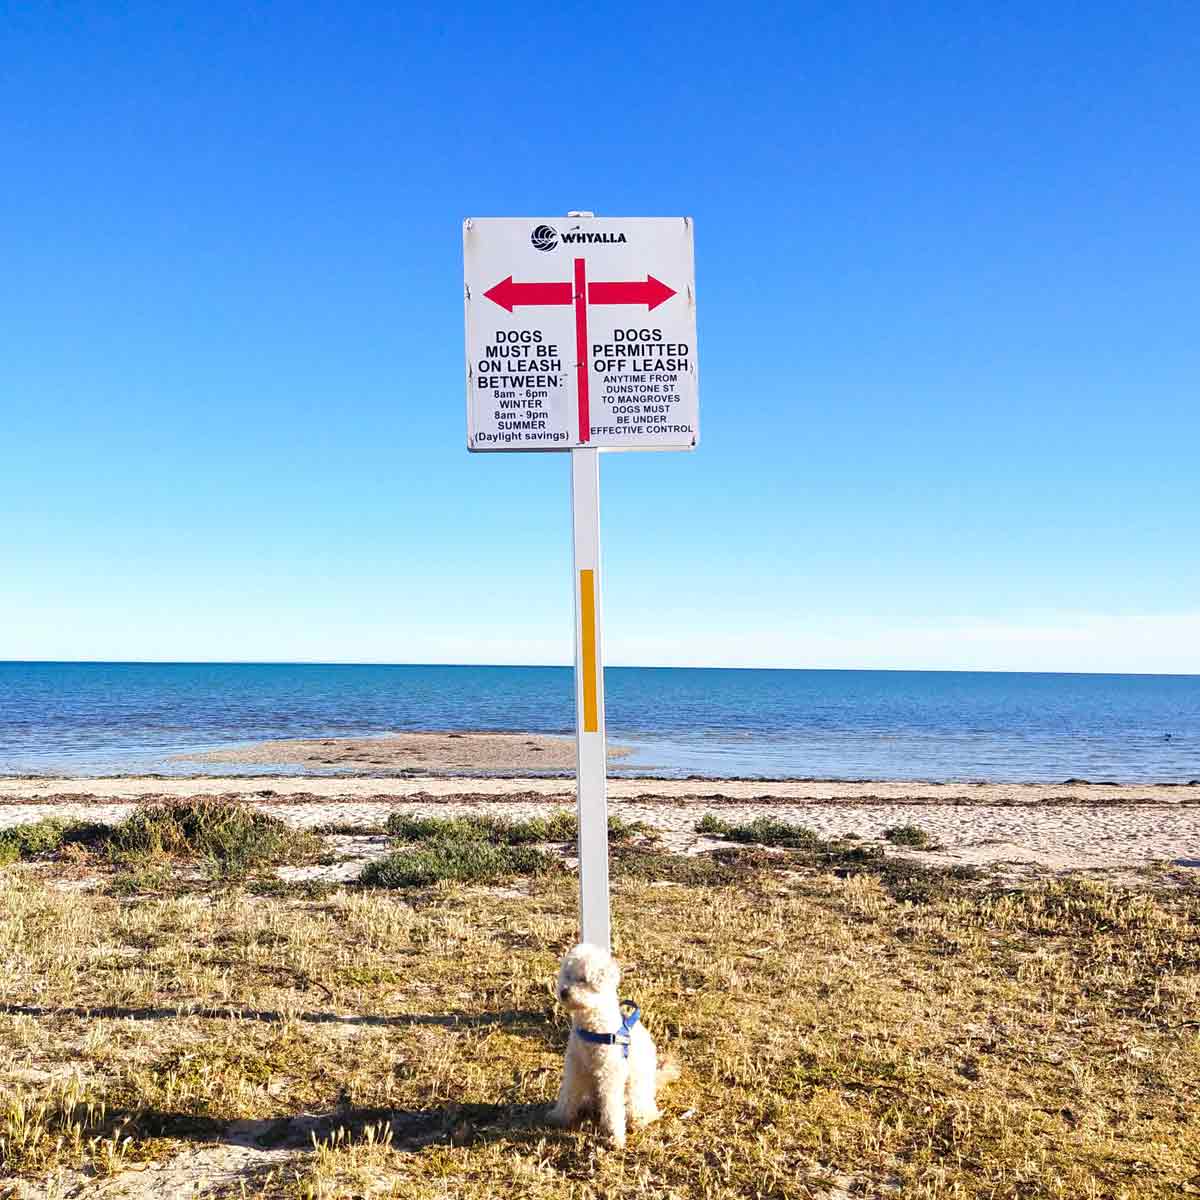 Whyalla Foreshore Discovery Park located along a dog-friendly beach, Eyre Peninsula, South Australia